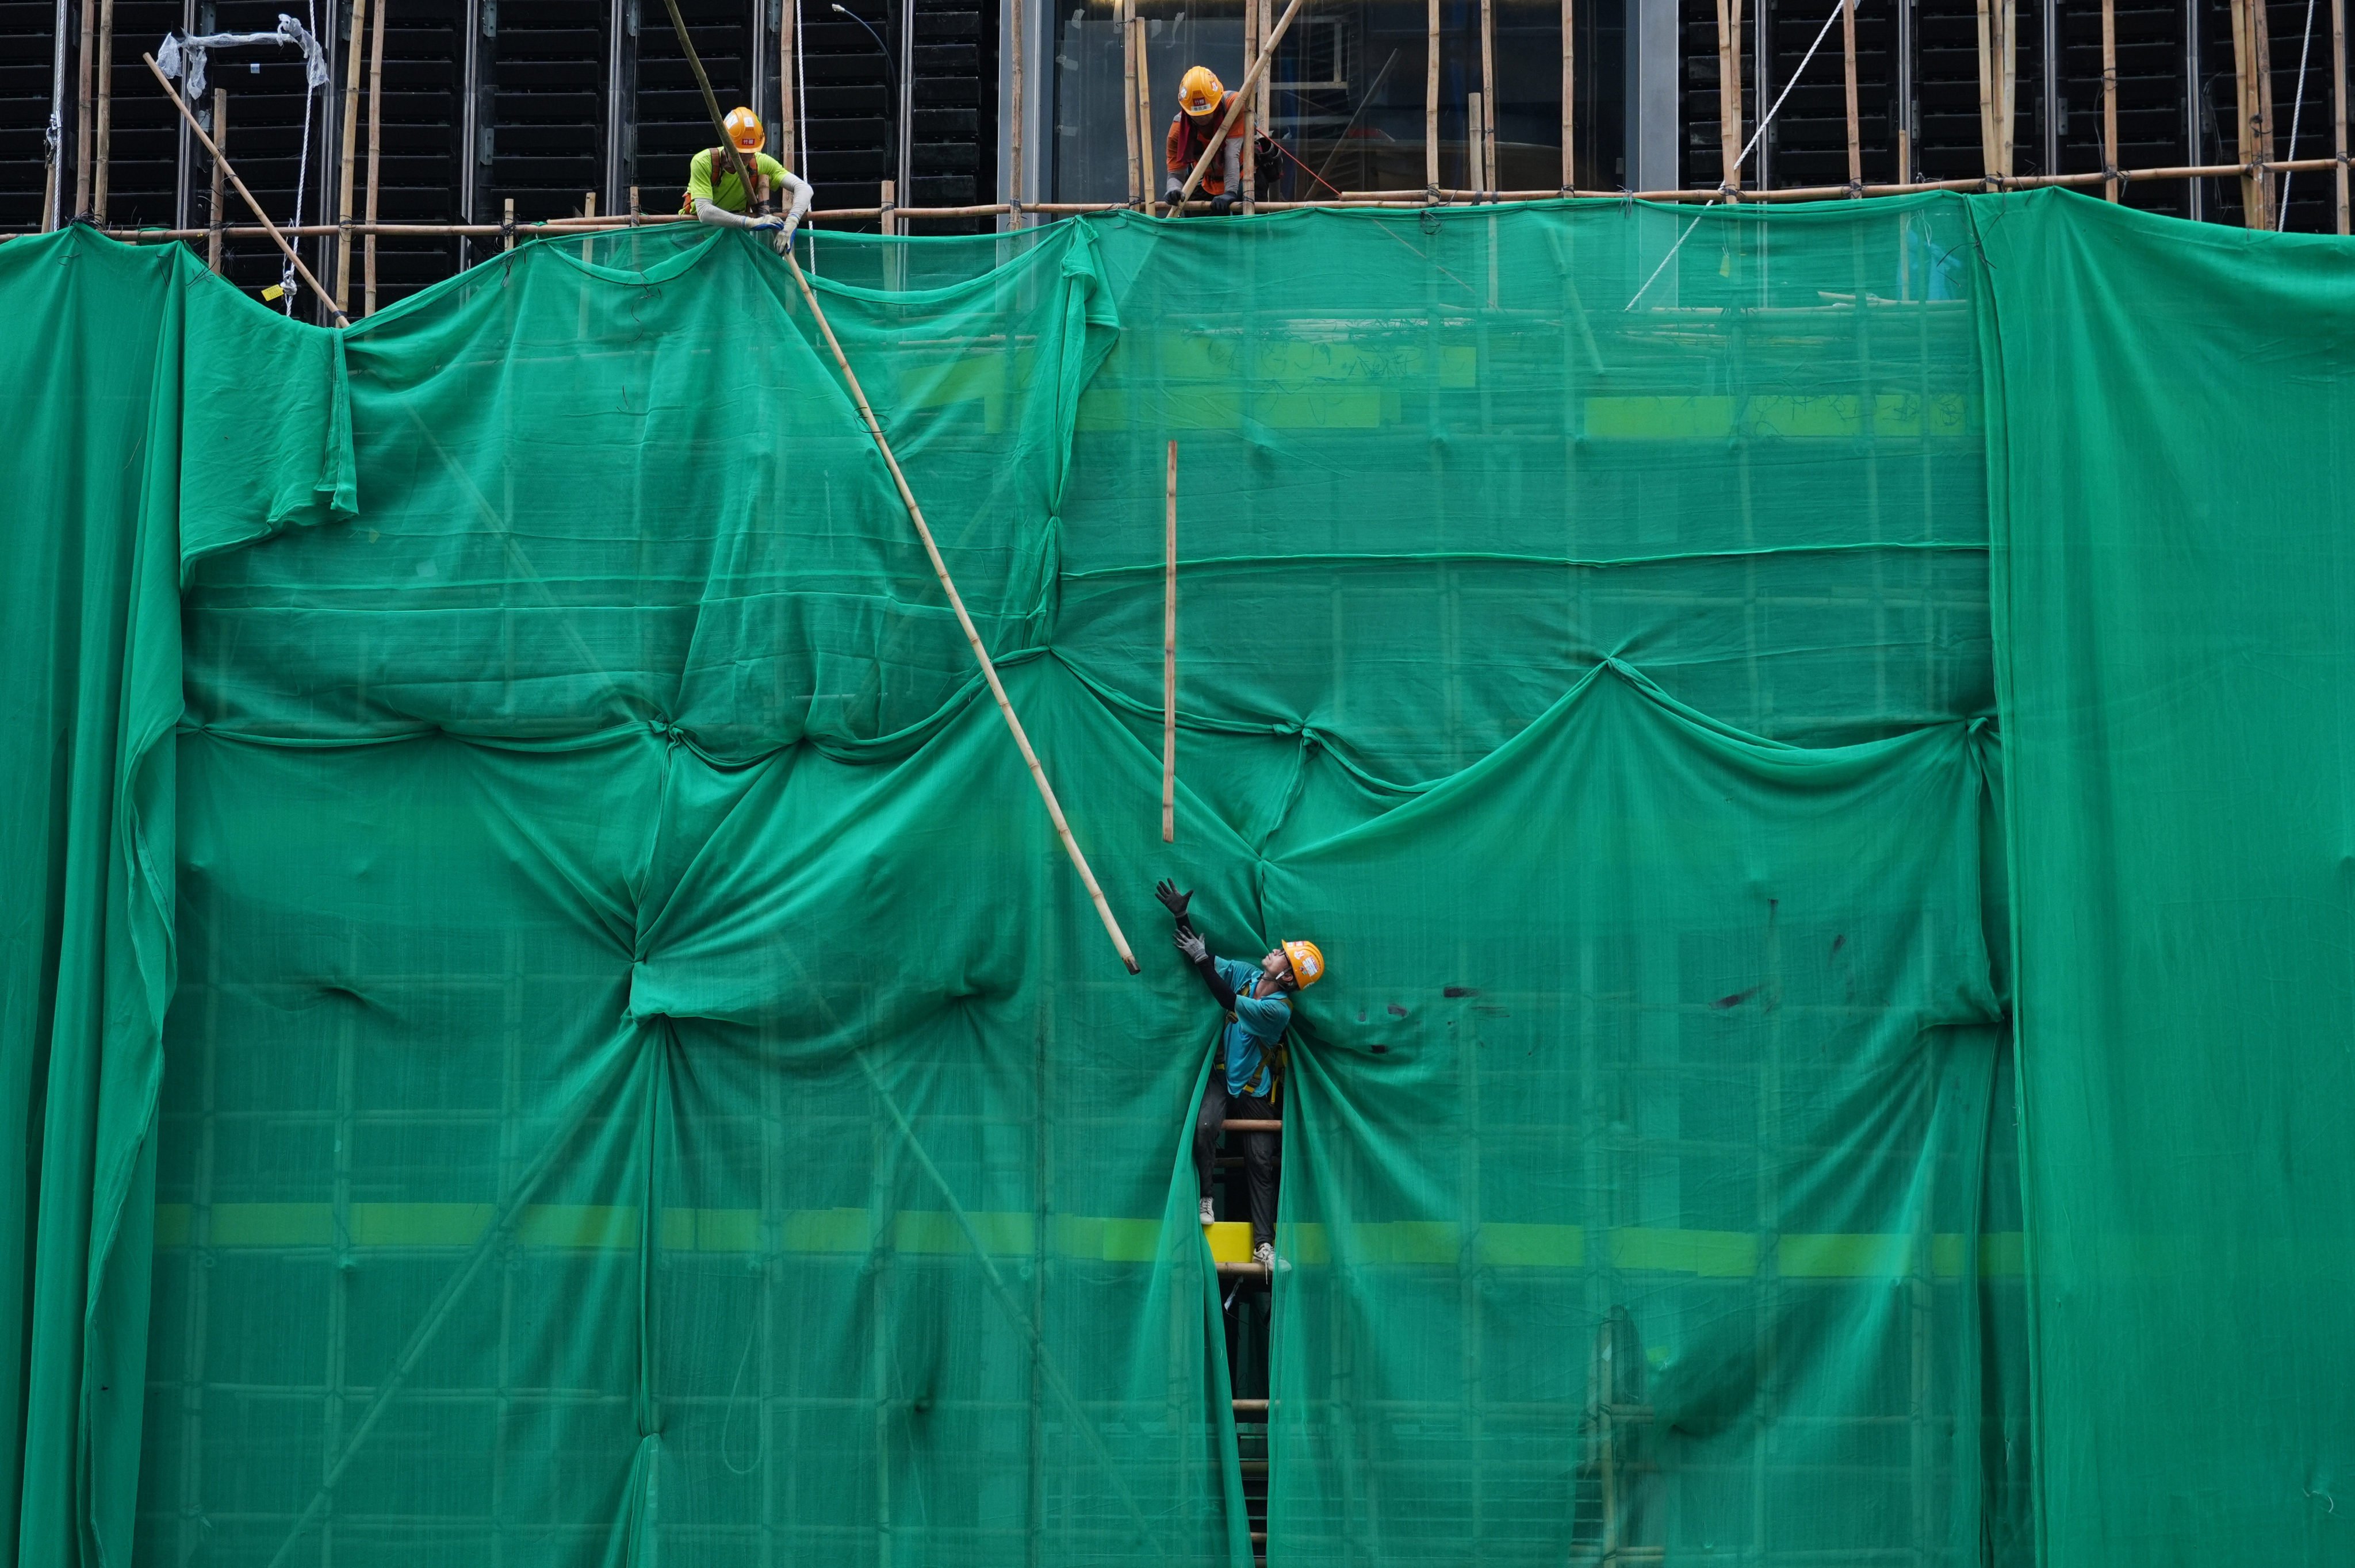 Employers should consider workers’ safety during adverse weather, according to the revised code of practice. Photo: Eugene Lee